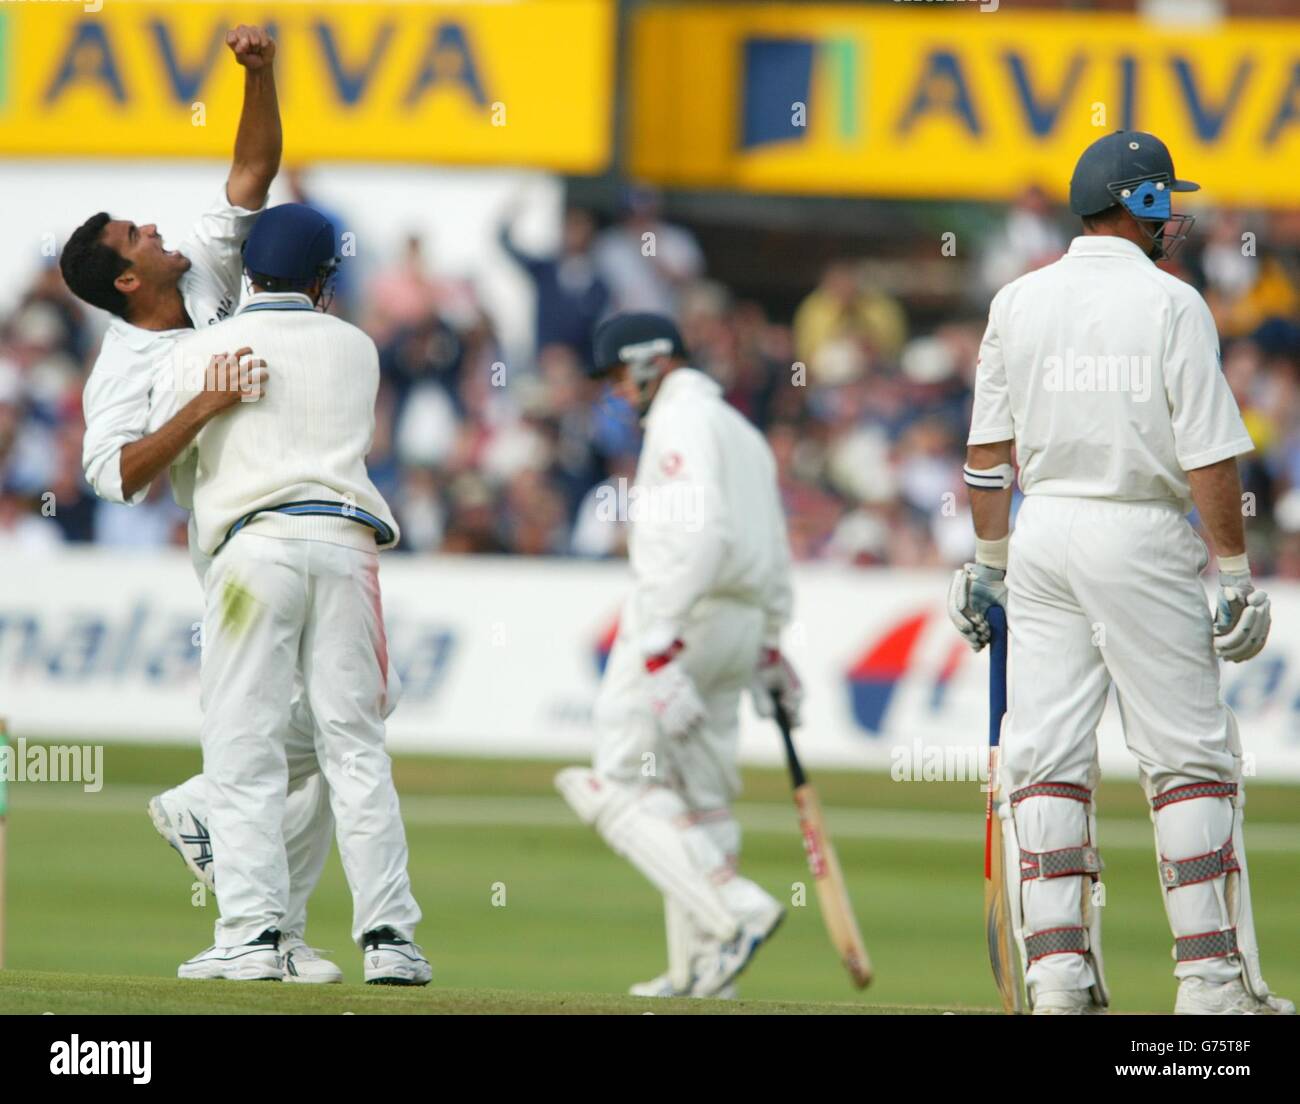 India's Zaheer Khan is congratulated by Varender Sehwag after trapping Nasser Hussain (right) lbw during the third day of the third npower test match between England and India at Headingley in Leeds. Stock Photo